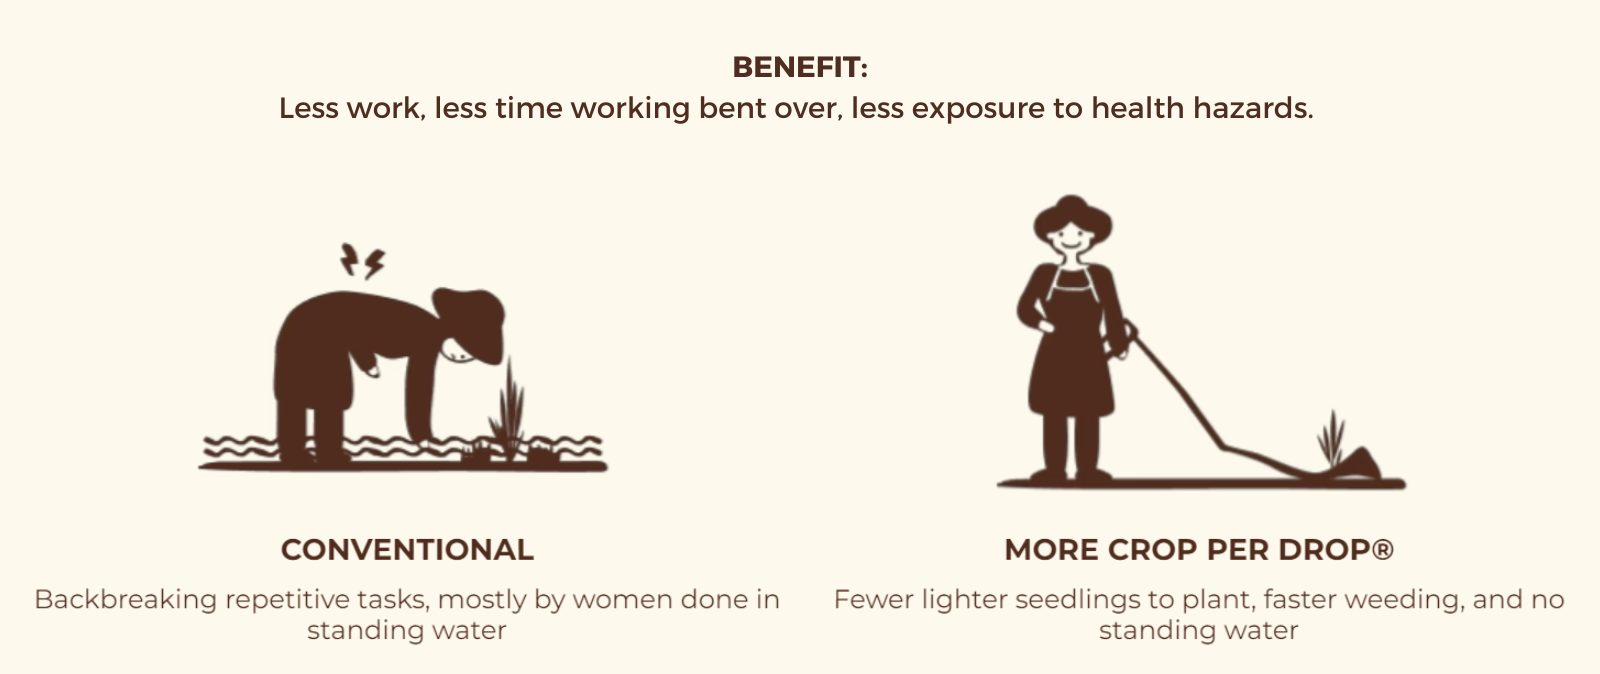 CONVENTIONAL Backbreaking repetitive tasks, mostly by women done in standing water   MORE CROP PER DROP® Fewer lighter seedlings to plant, faster weeding, and no standing water     BENEFIT: Less work, less time working bent over, less exposure to health hazards.